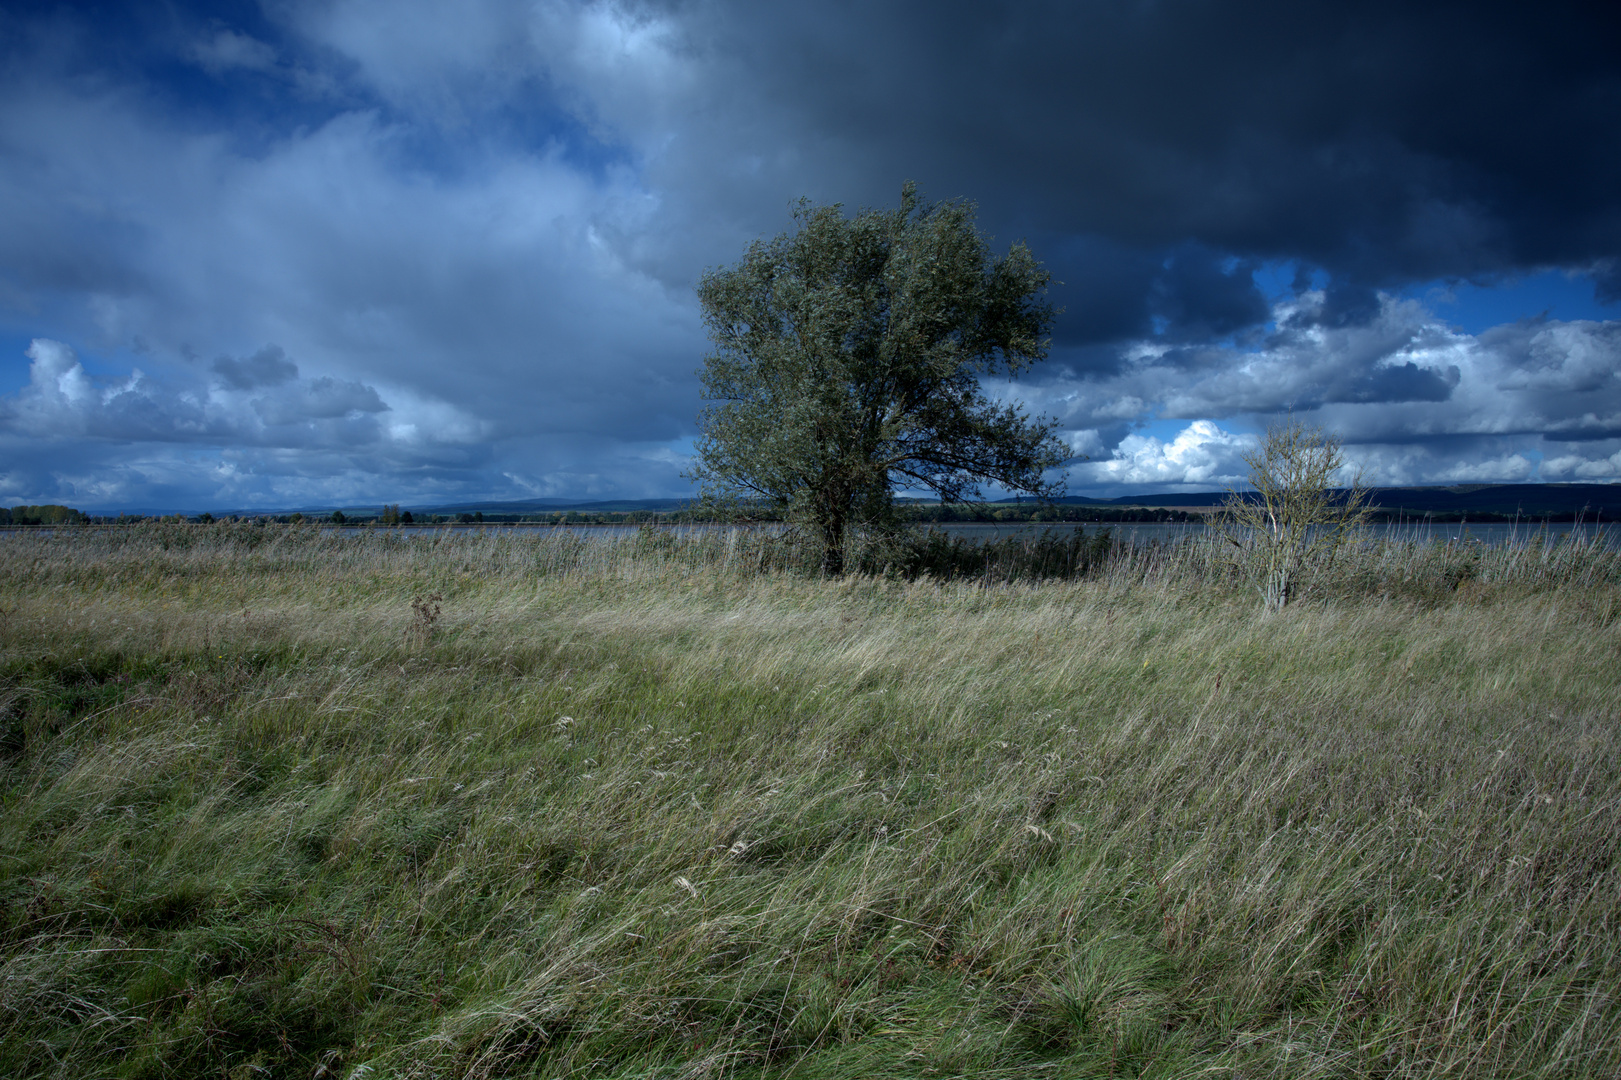 View of stormy clouds and  landscape